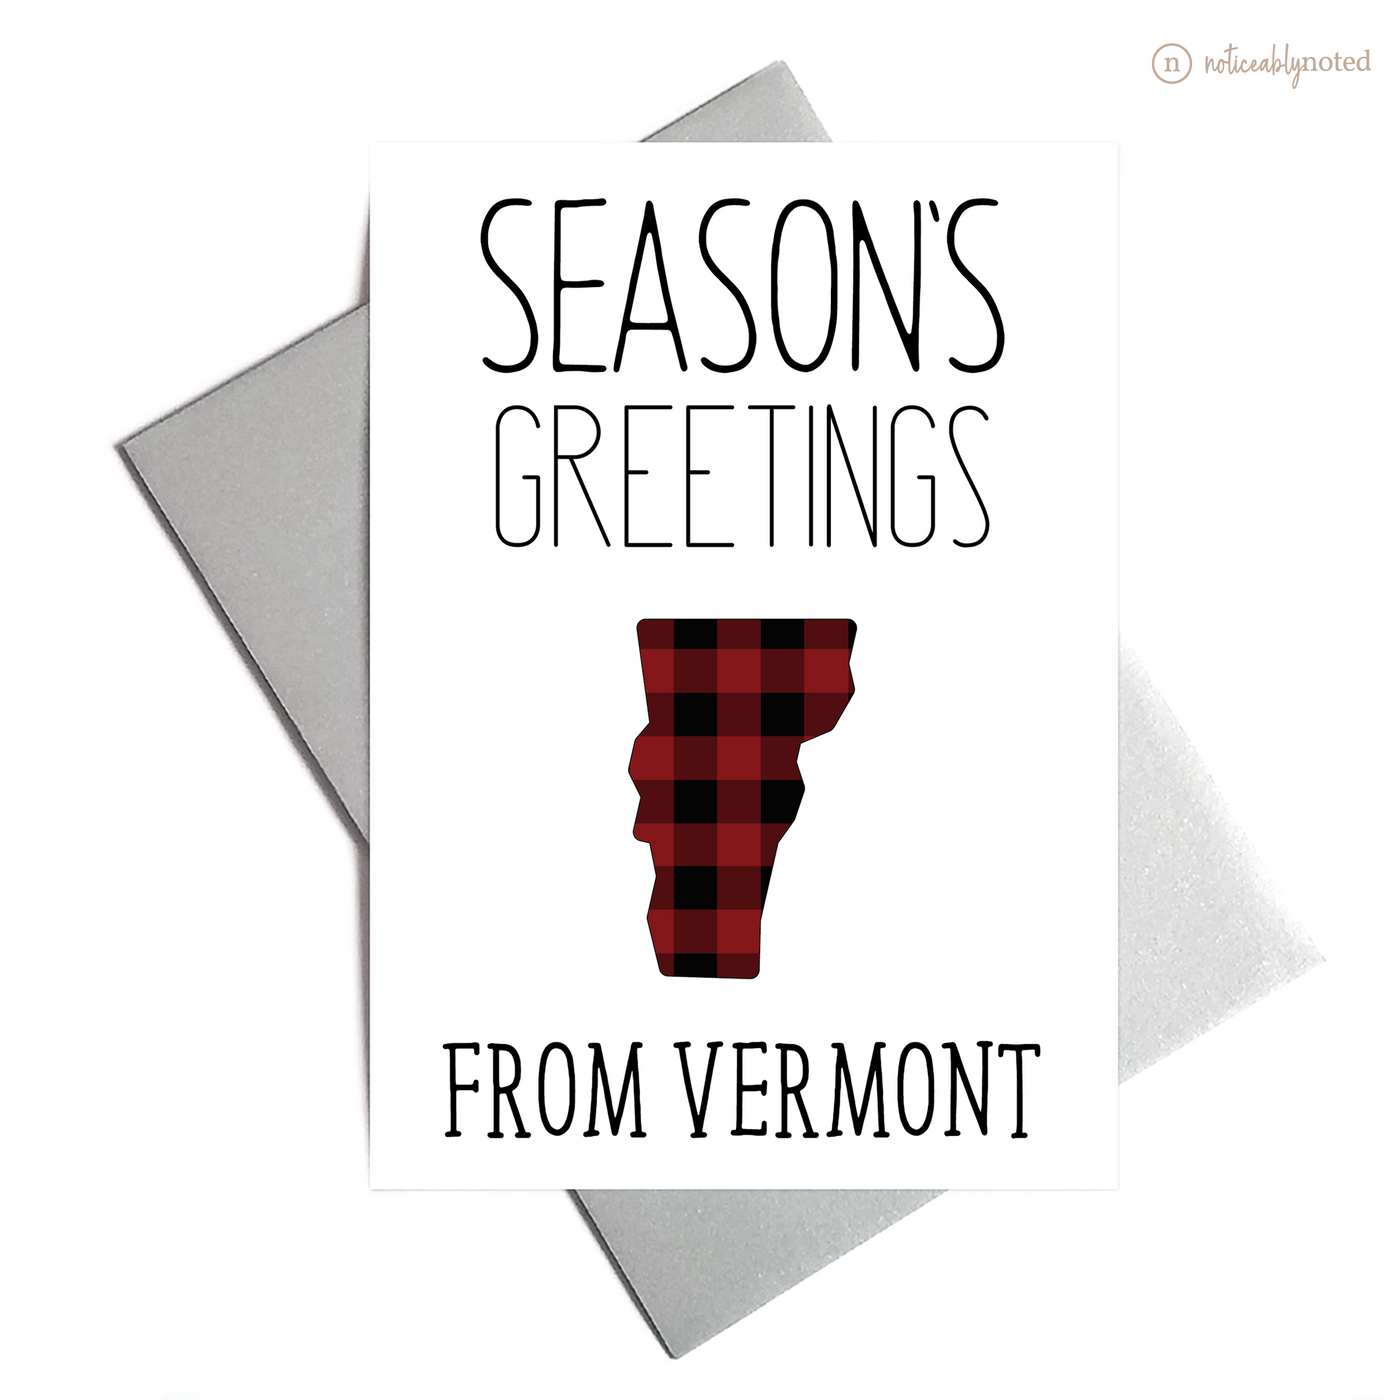 Vermont Holiday Card - Season's Greetings | Noticeably Noted